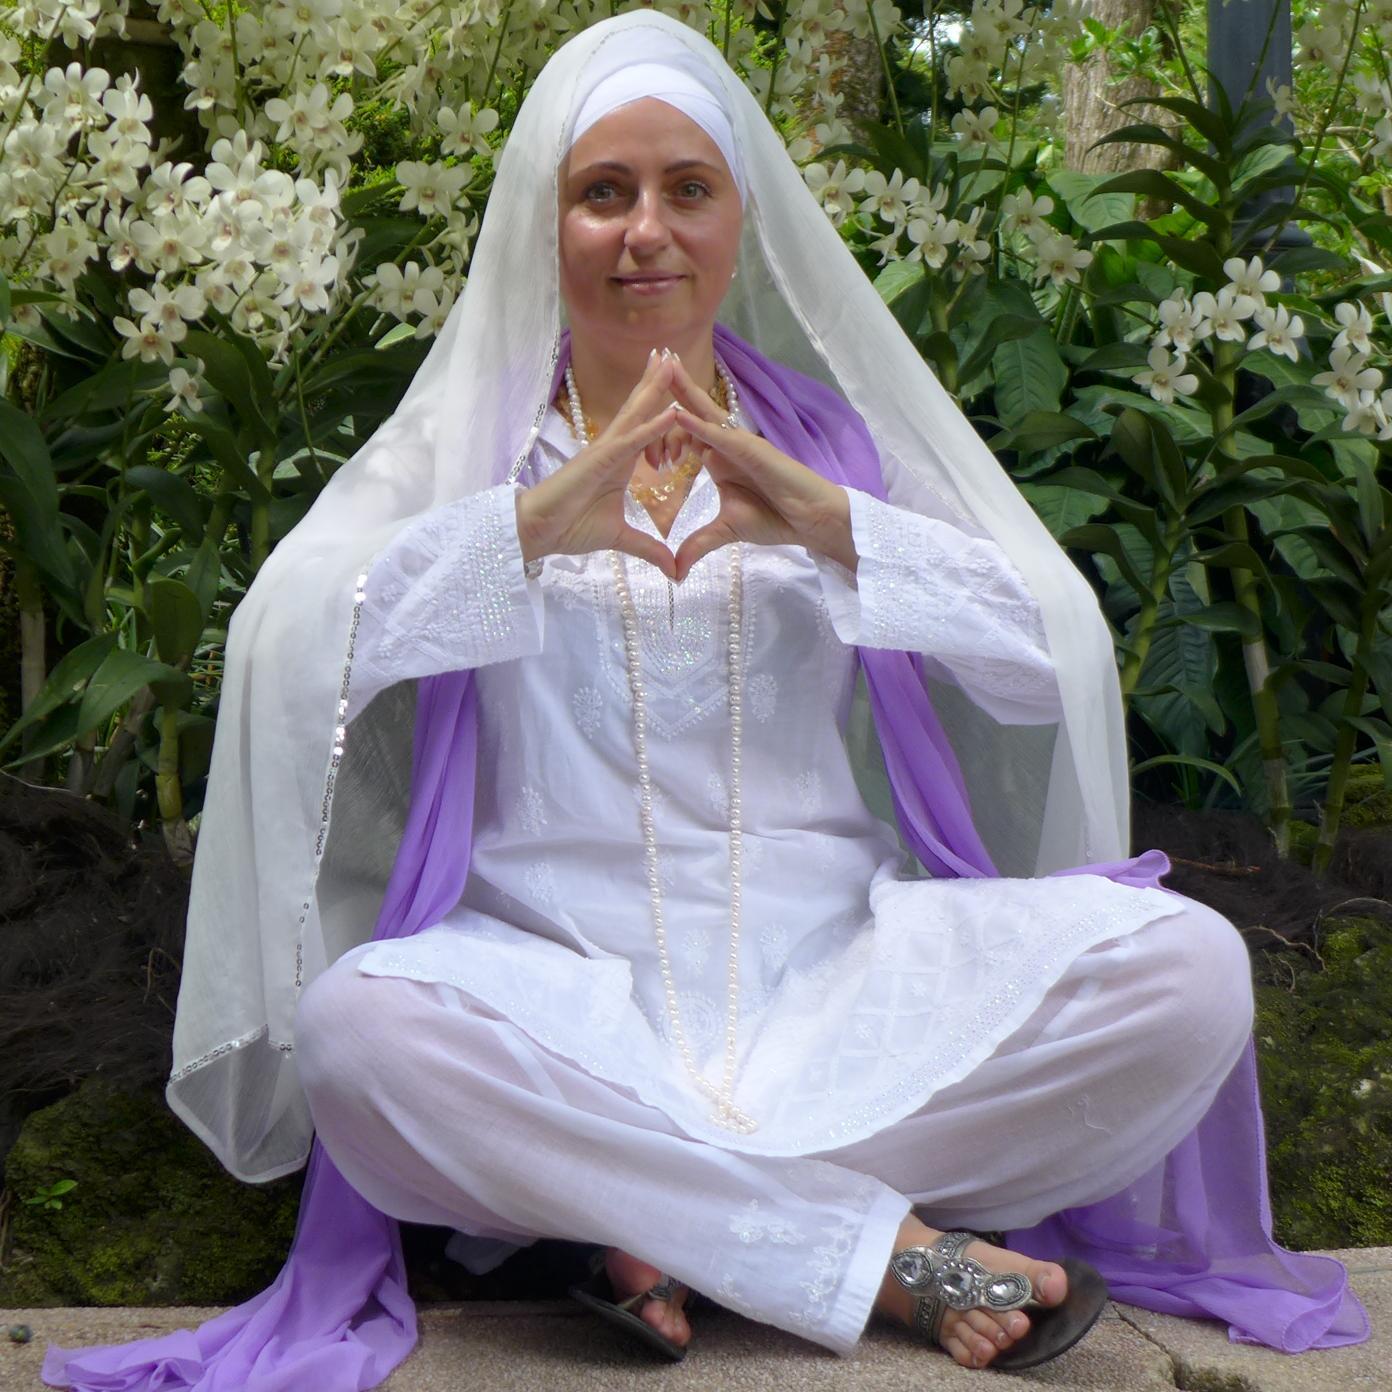 PRIVATE WELLNESS STUDIO with  OLGA ONKAR KAUR  Private Session for Healing & Kundalini Yoga Call us now or register on the website https://t.co/mgILZCuNB7